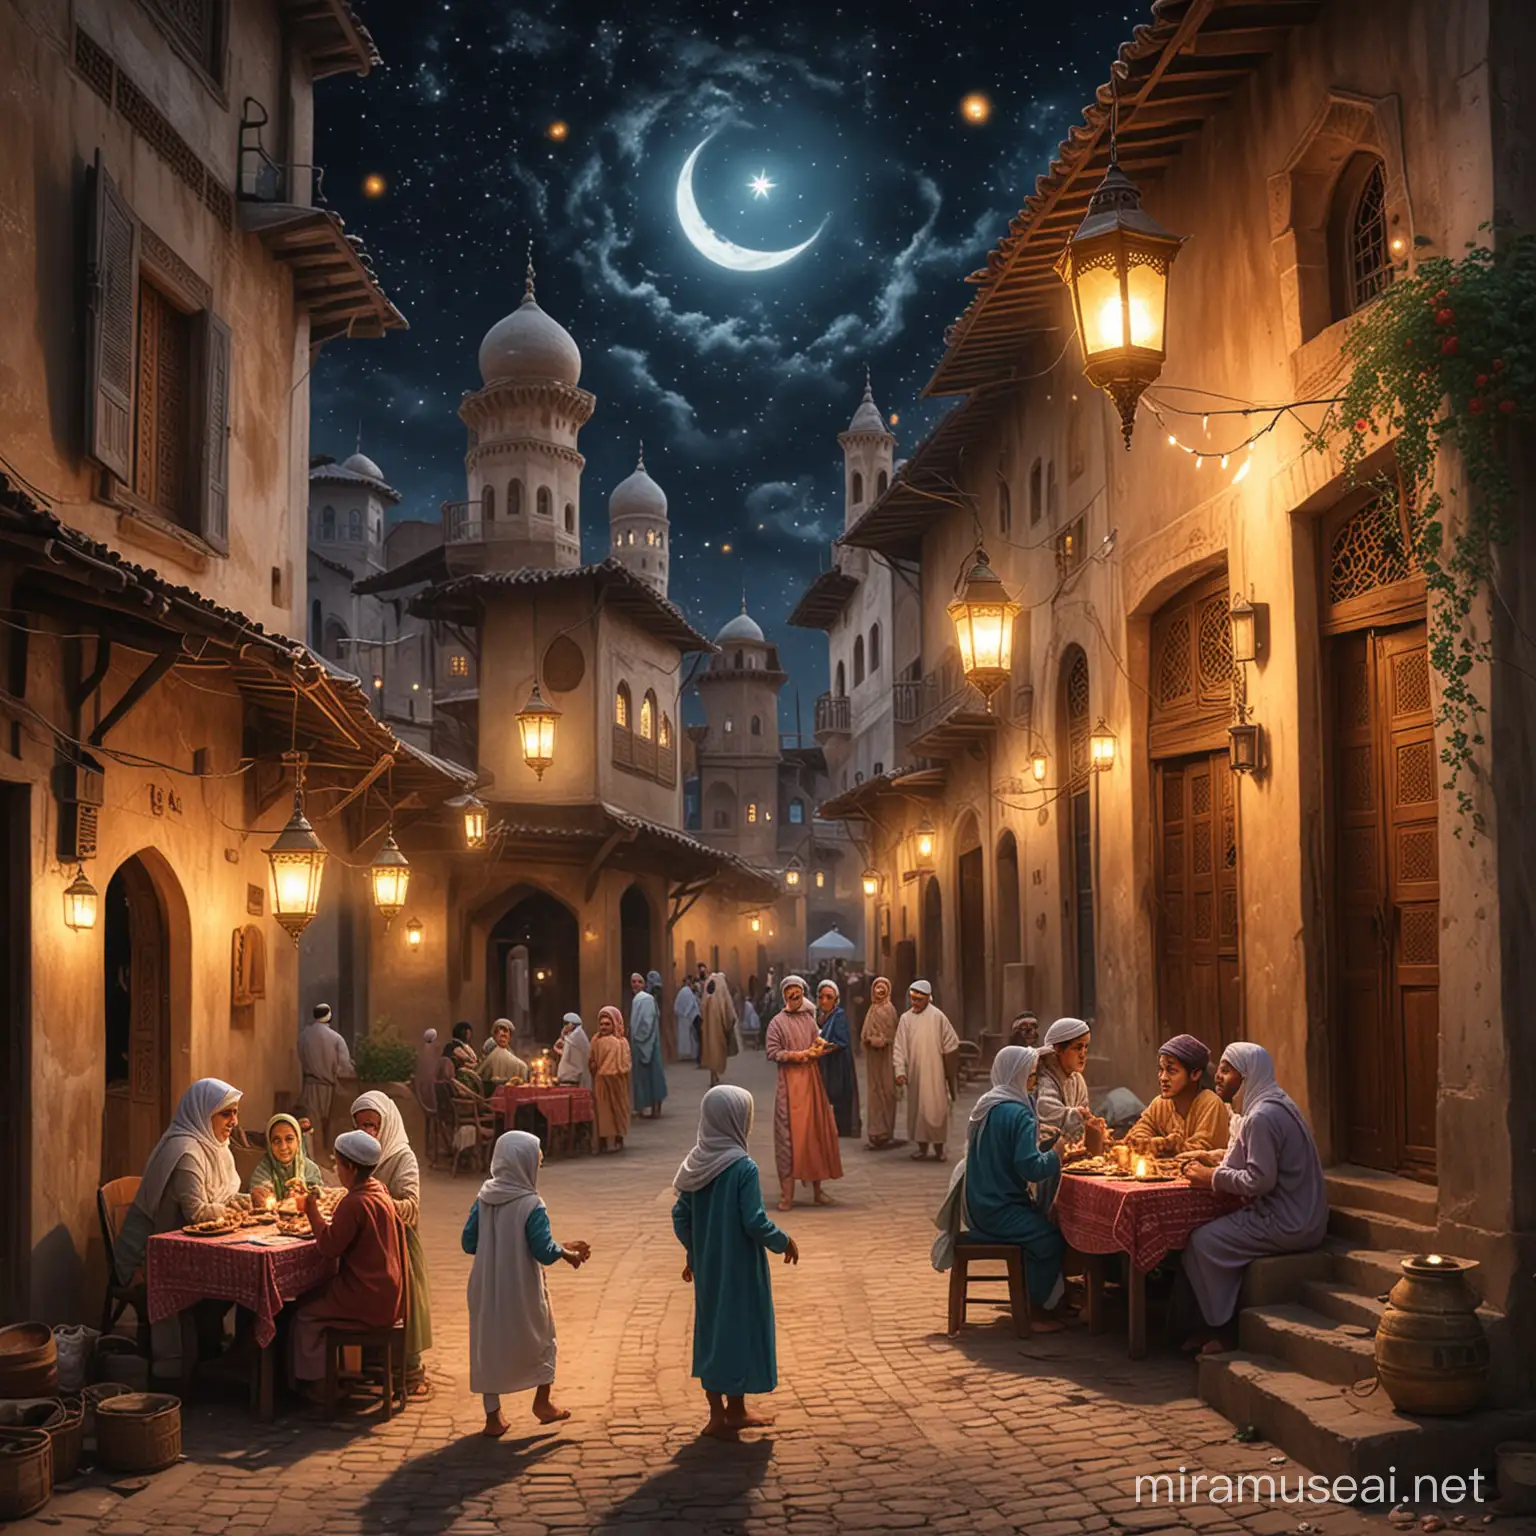 A picture of Ramadan's lame at Iftar and it will be in the picture of Ramadan and the lantern around the old houses and the children play.